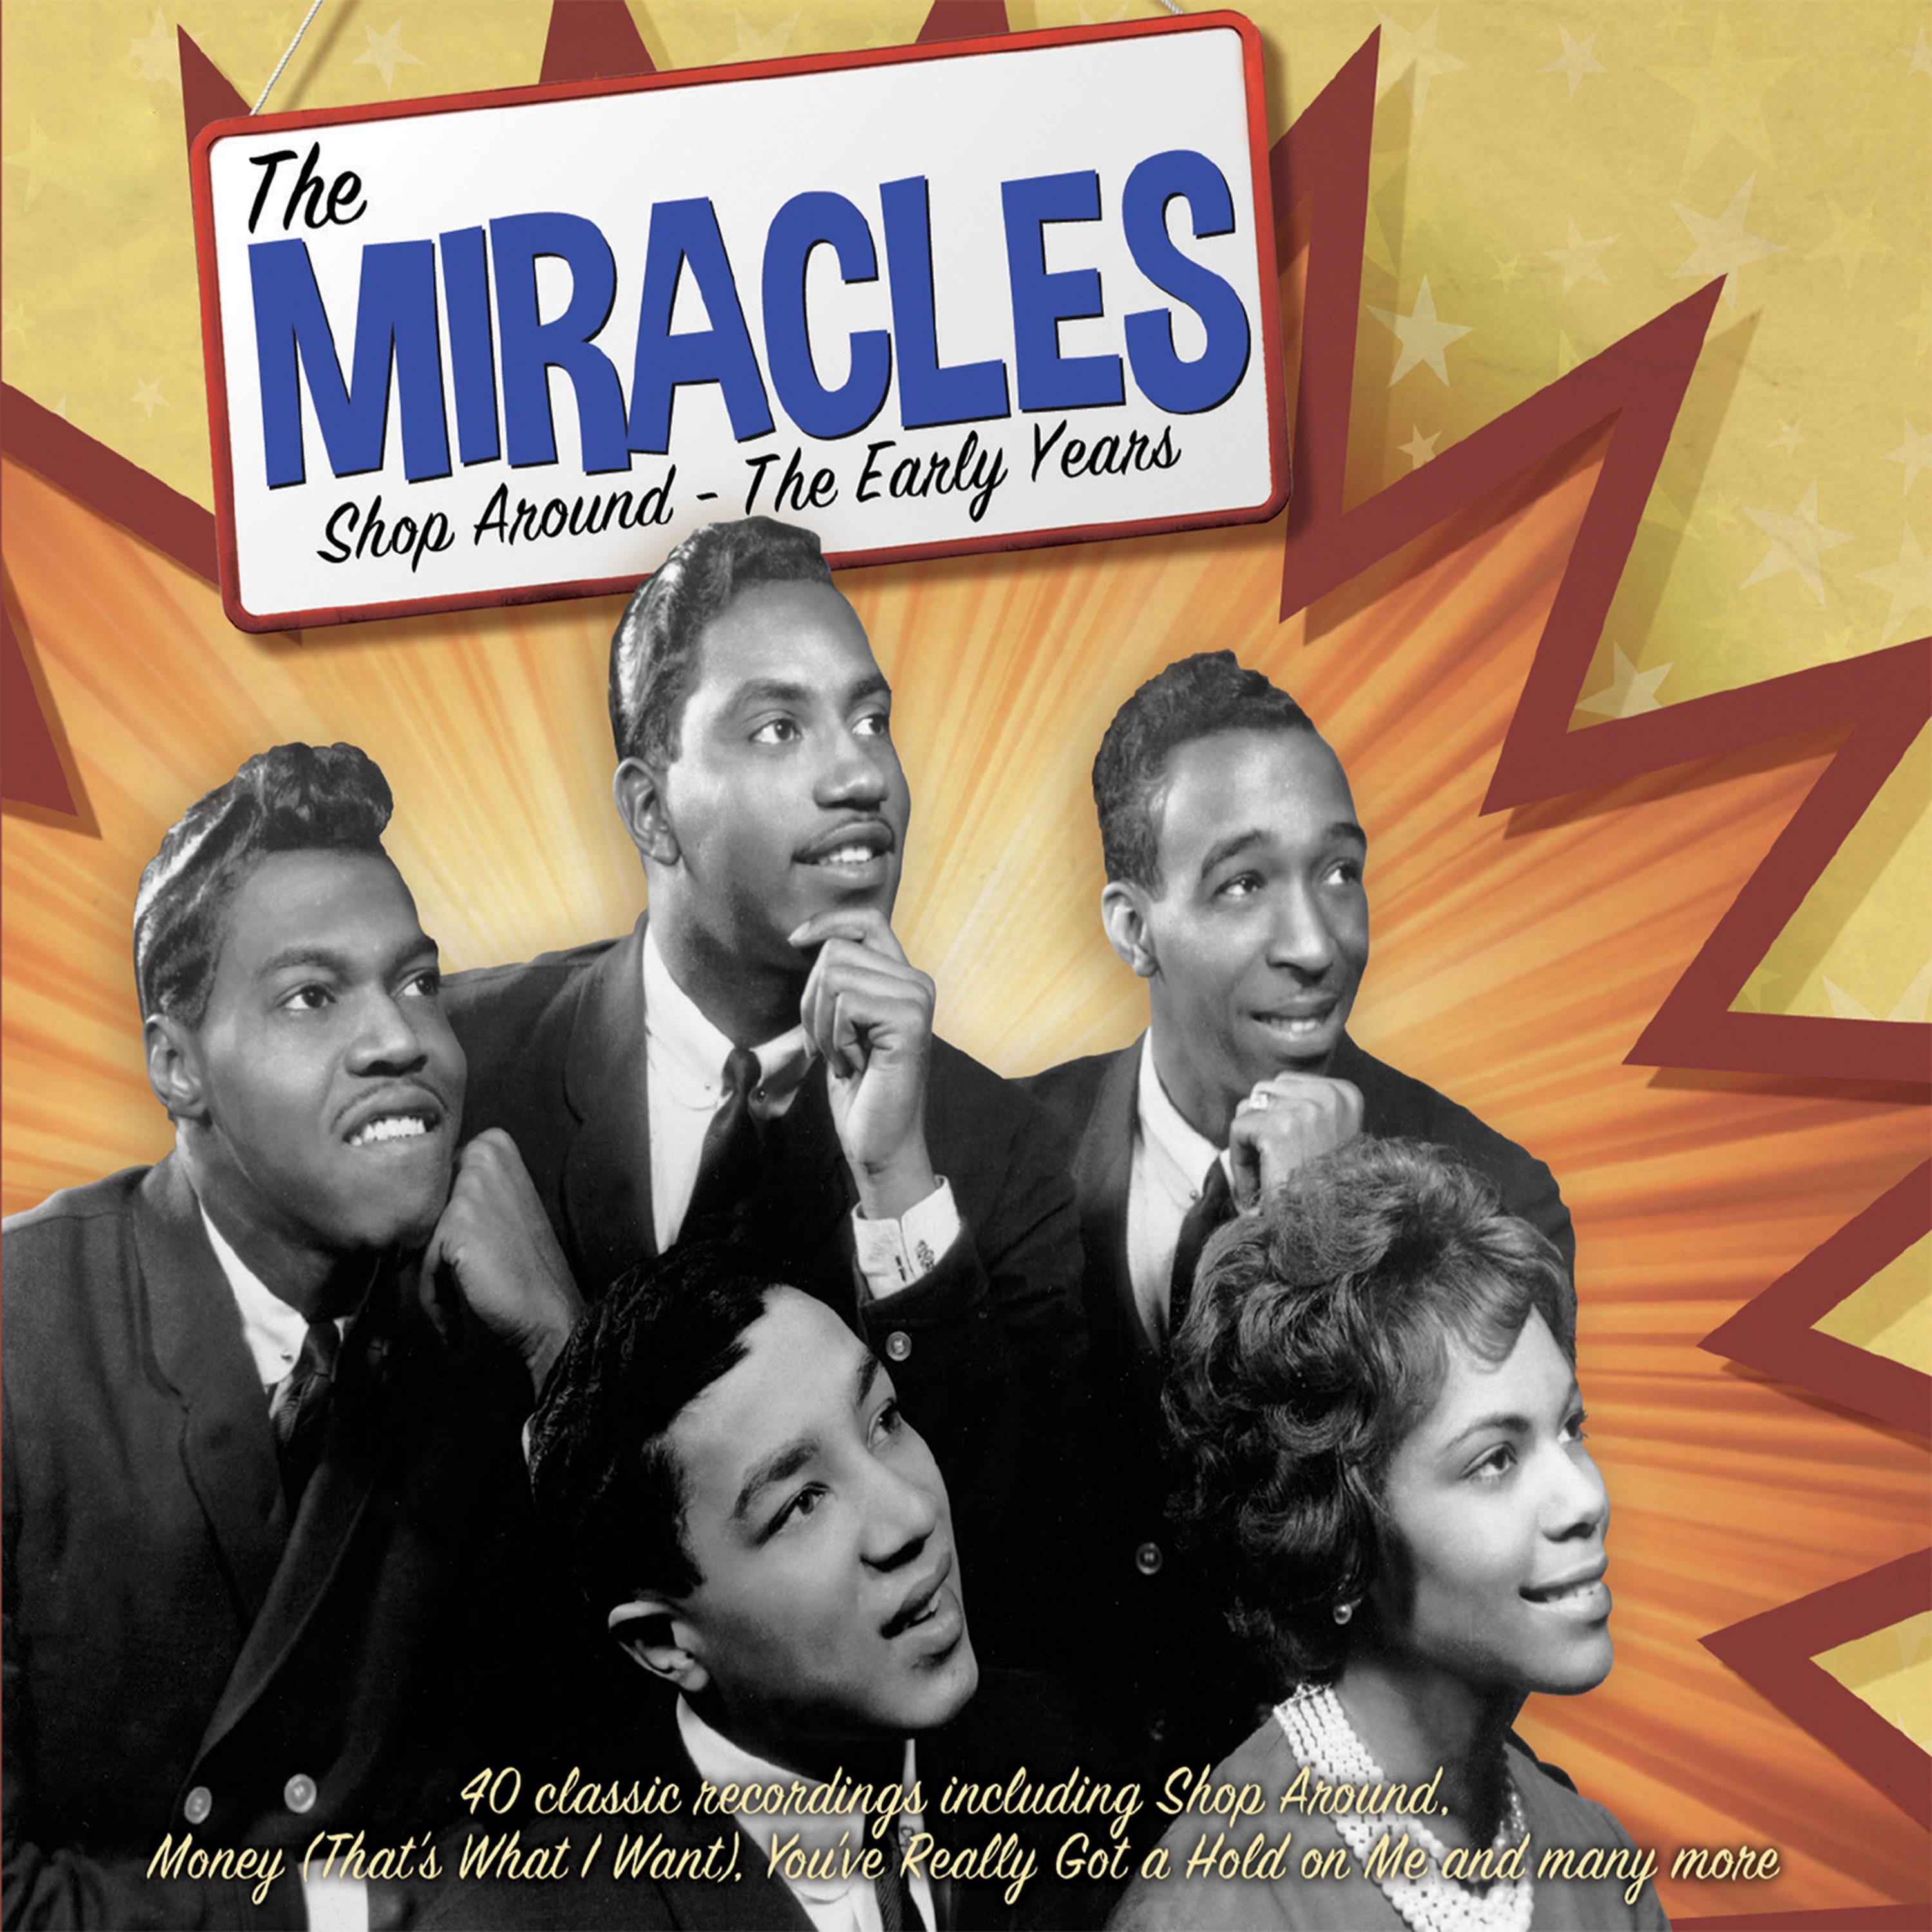 Shop Around: The Early Years of The Miracles